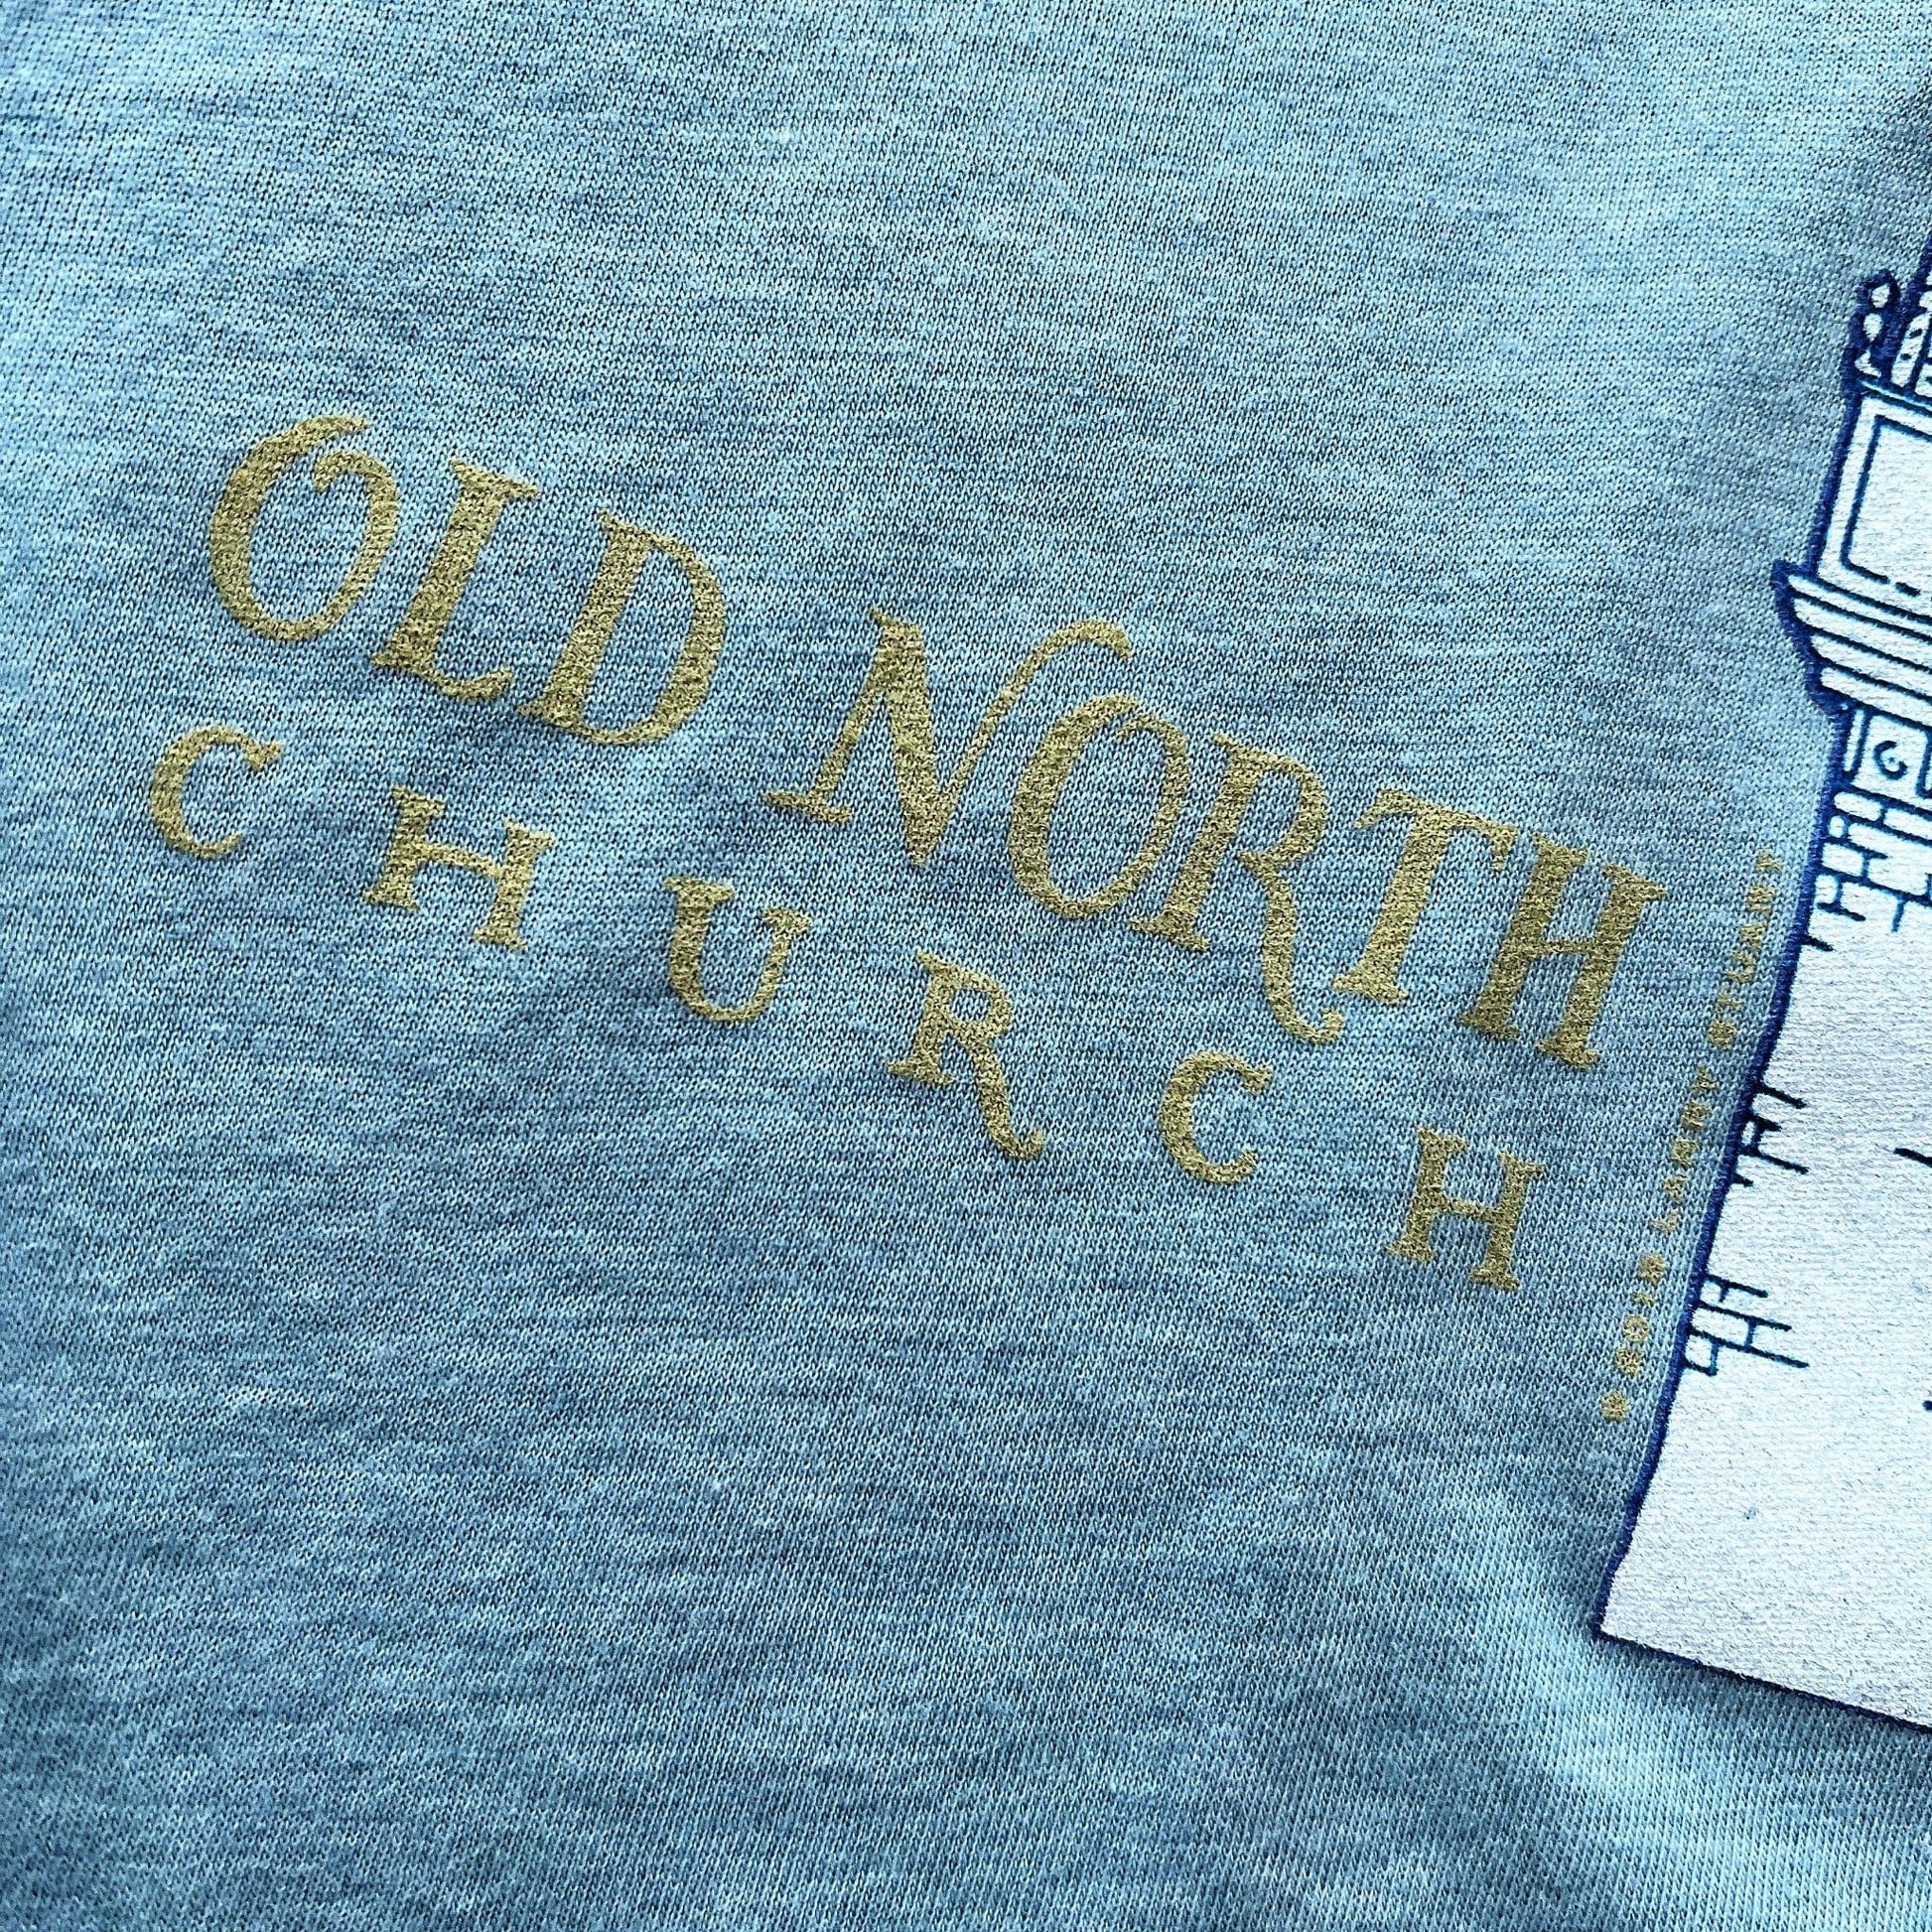 Old North Church Close-up print "One if by land . . ." Special Edition Shirt from the history list store